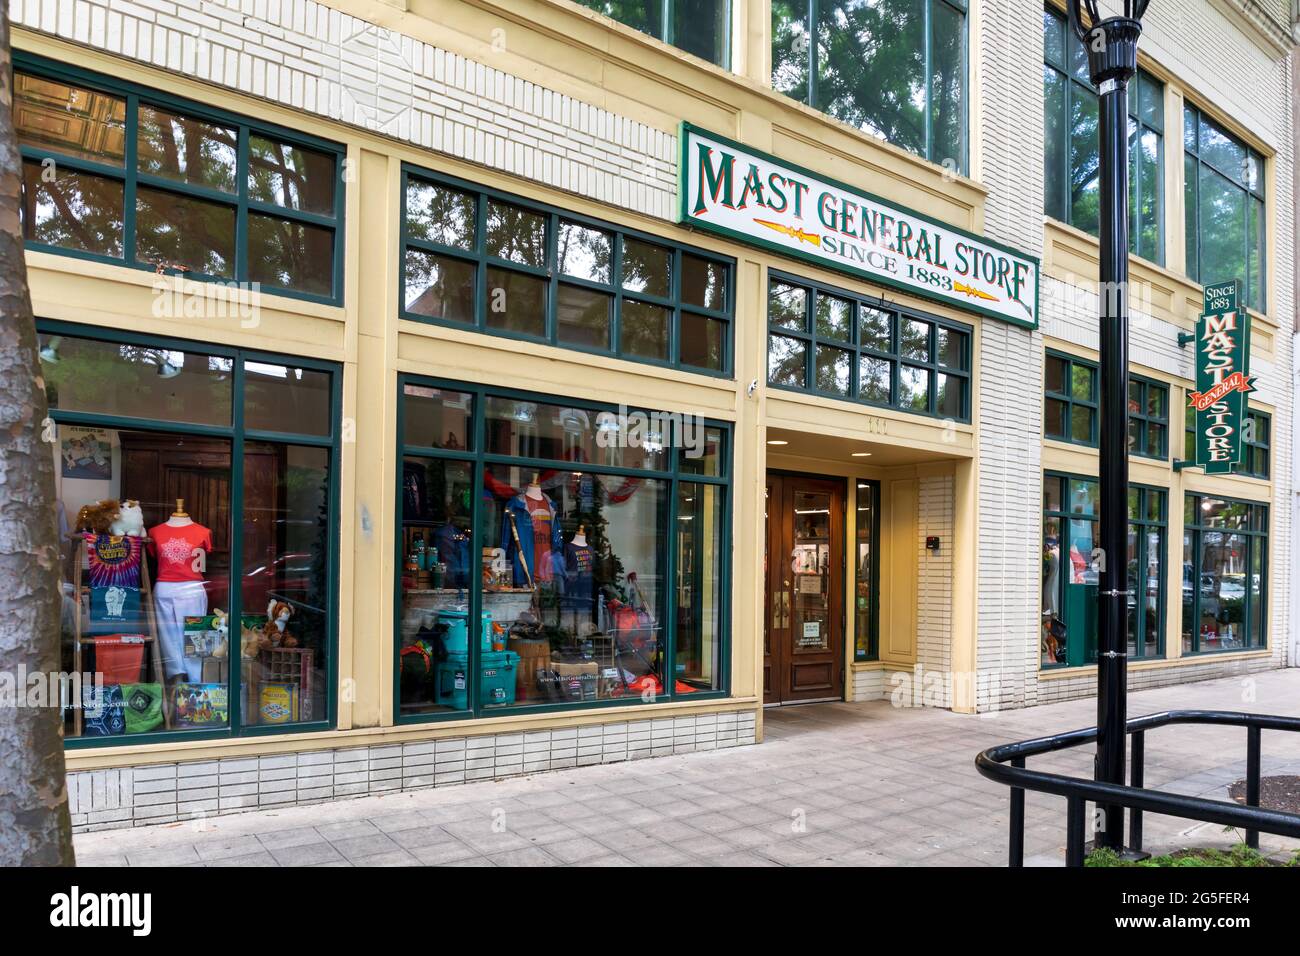 GREENVILLE, SC, USA-23 JUNE 2021: The Mast General Store on Main St. in downtown, showing diagonal front view, windows, sign, sidewalk. Stock Photo